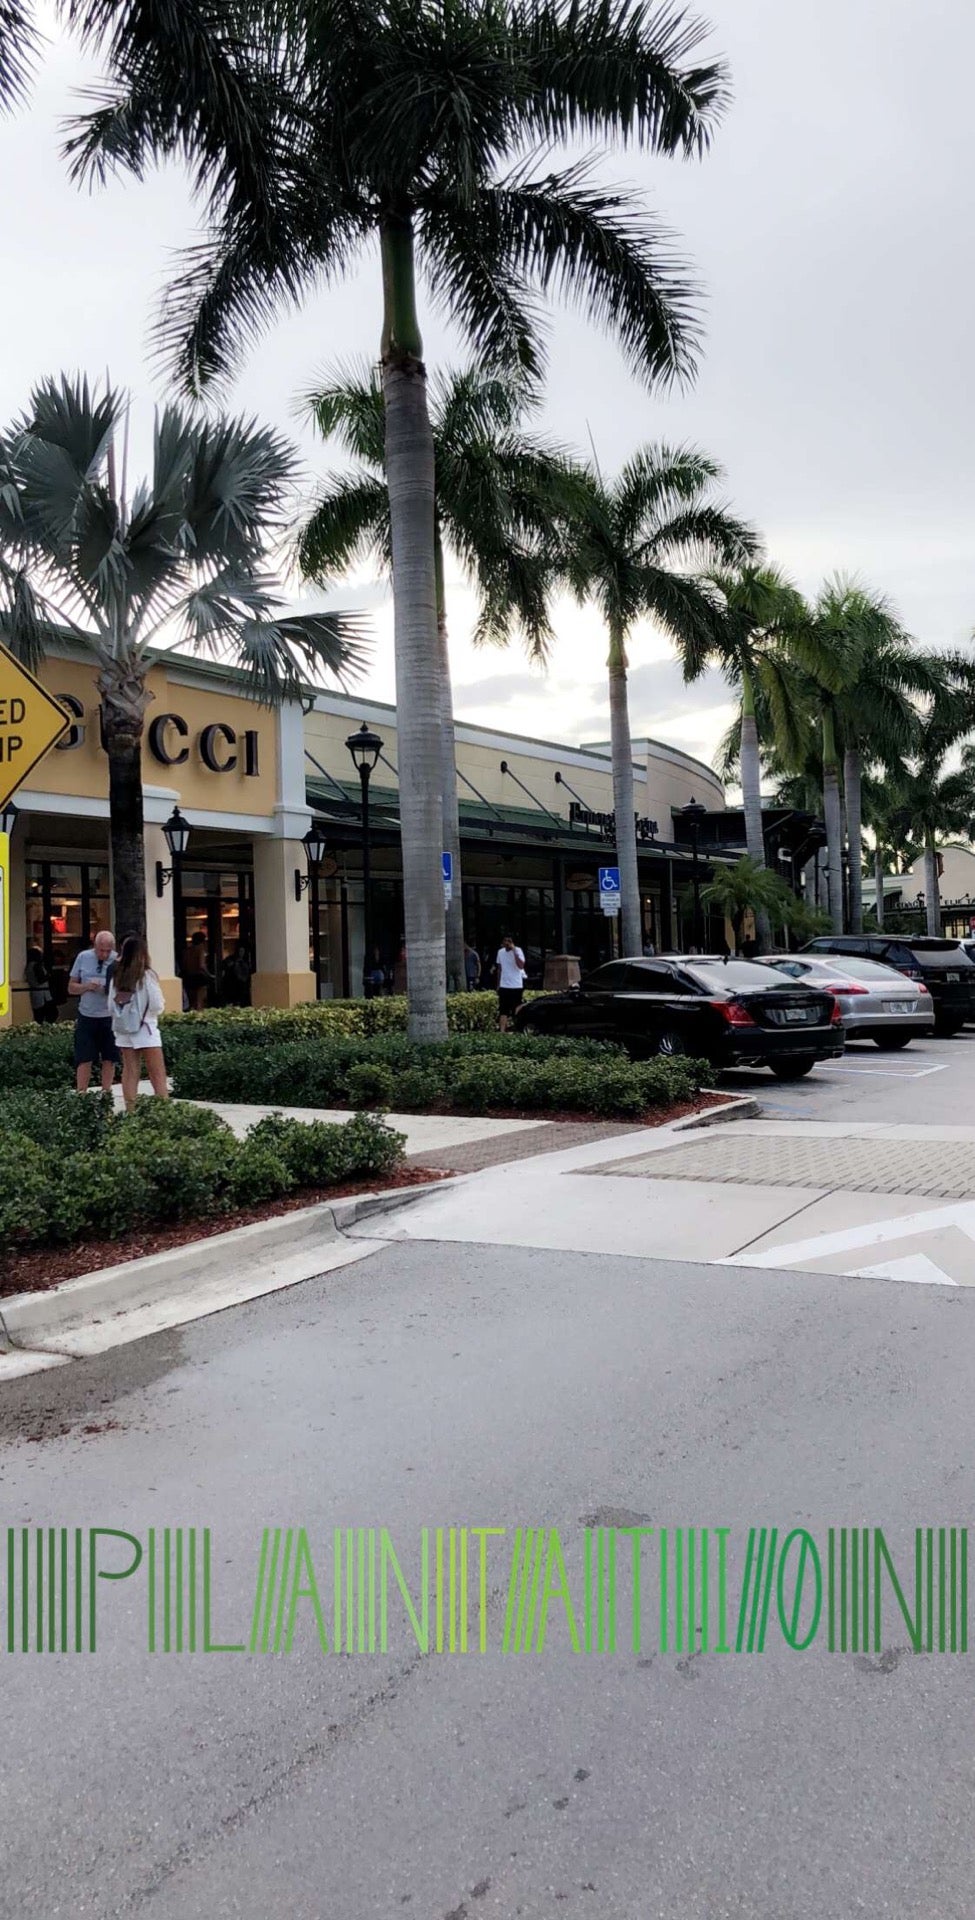 GUCCI OUTLET - 29 Photos & 70 Reviews - 1700 Sawgrass Mills Cir, Sunrise,  Florida - Men's Clothing - Phone Number - Yelp